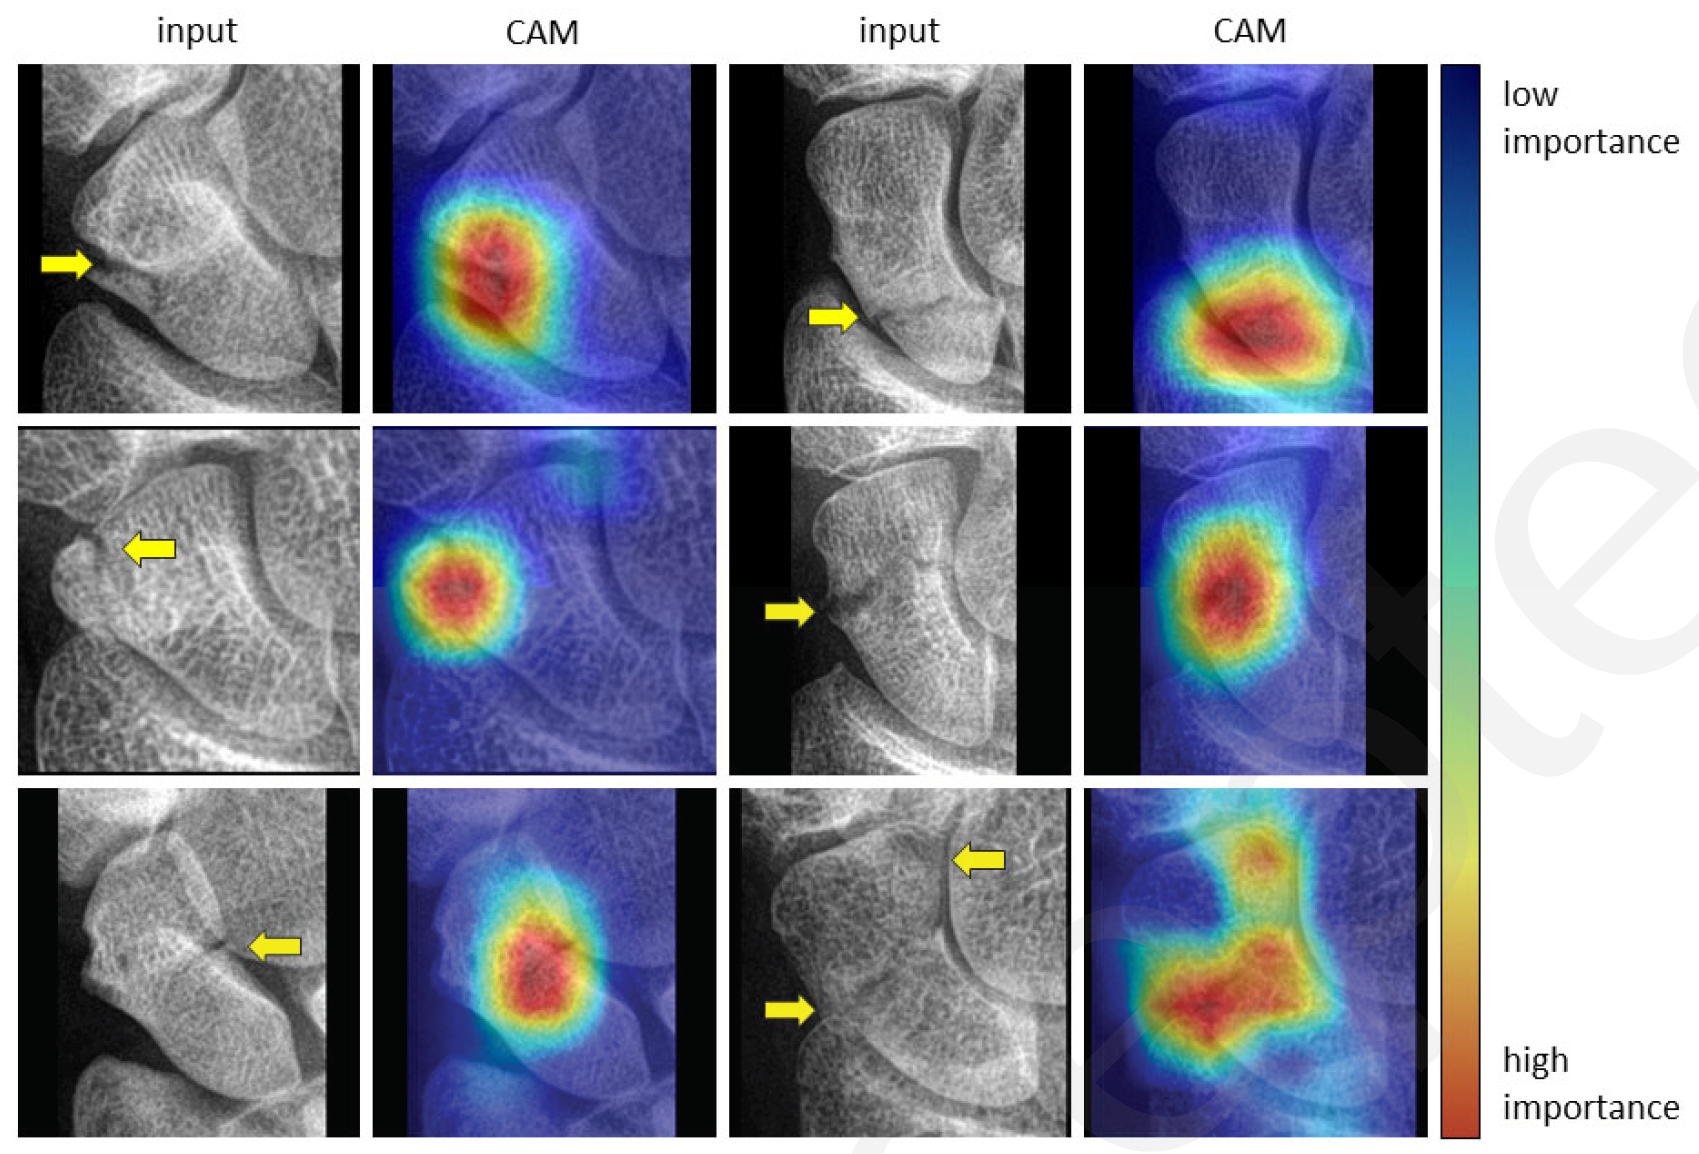 Examples of class activation map (CAM) for localizing fractures. The interpretation of the CMAs follows from the color coding of a heat map, in which pixel regions with a warm color signify a greater influence on the final decision of the network than regions with a cold color. The yellow arrows projected on the input images indicate the fracture lines, and they are only shown for reference.

Credit: RSNA